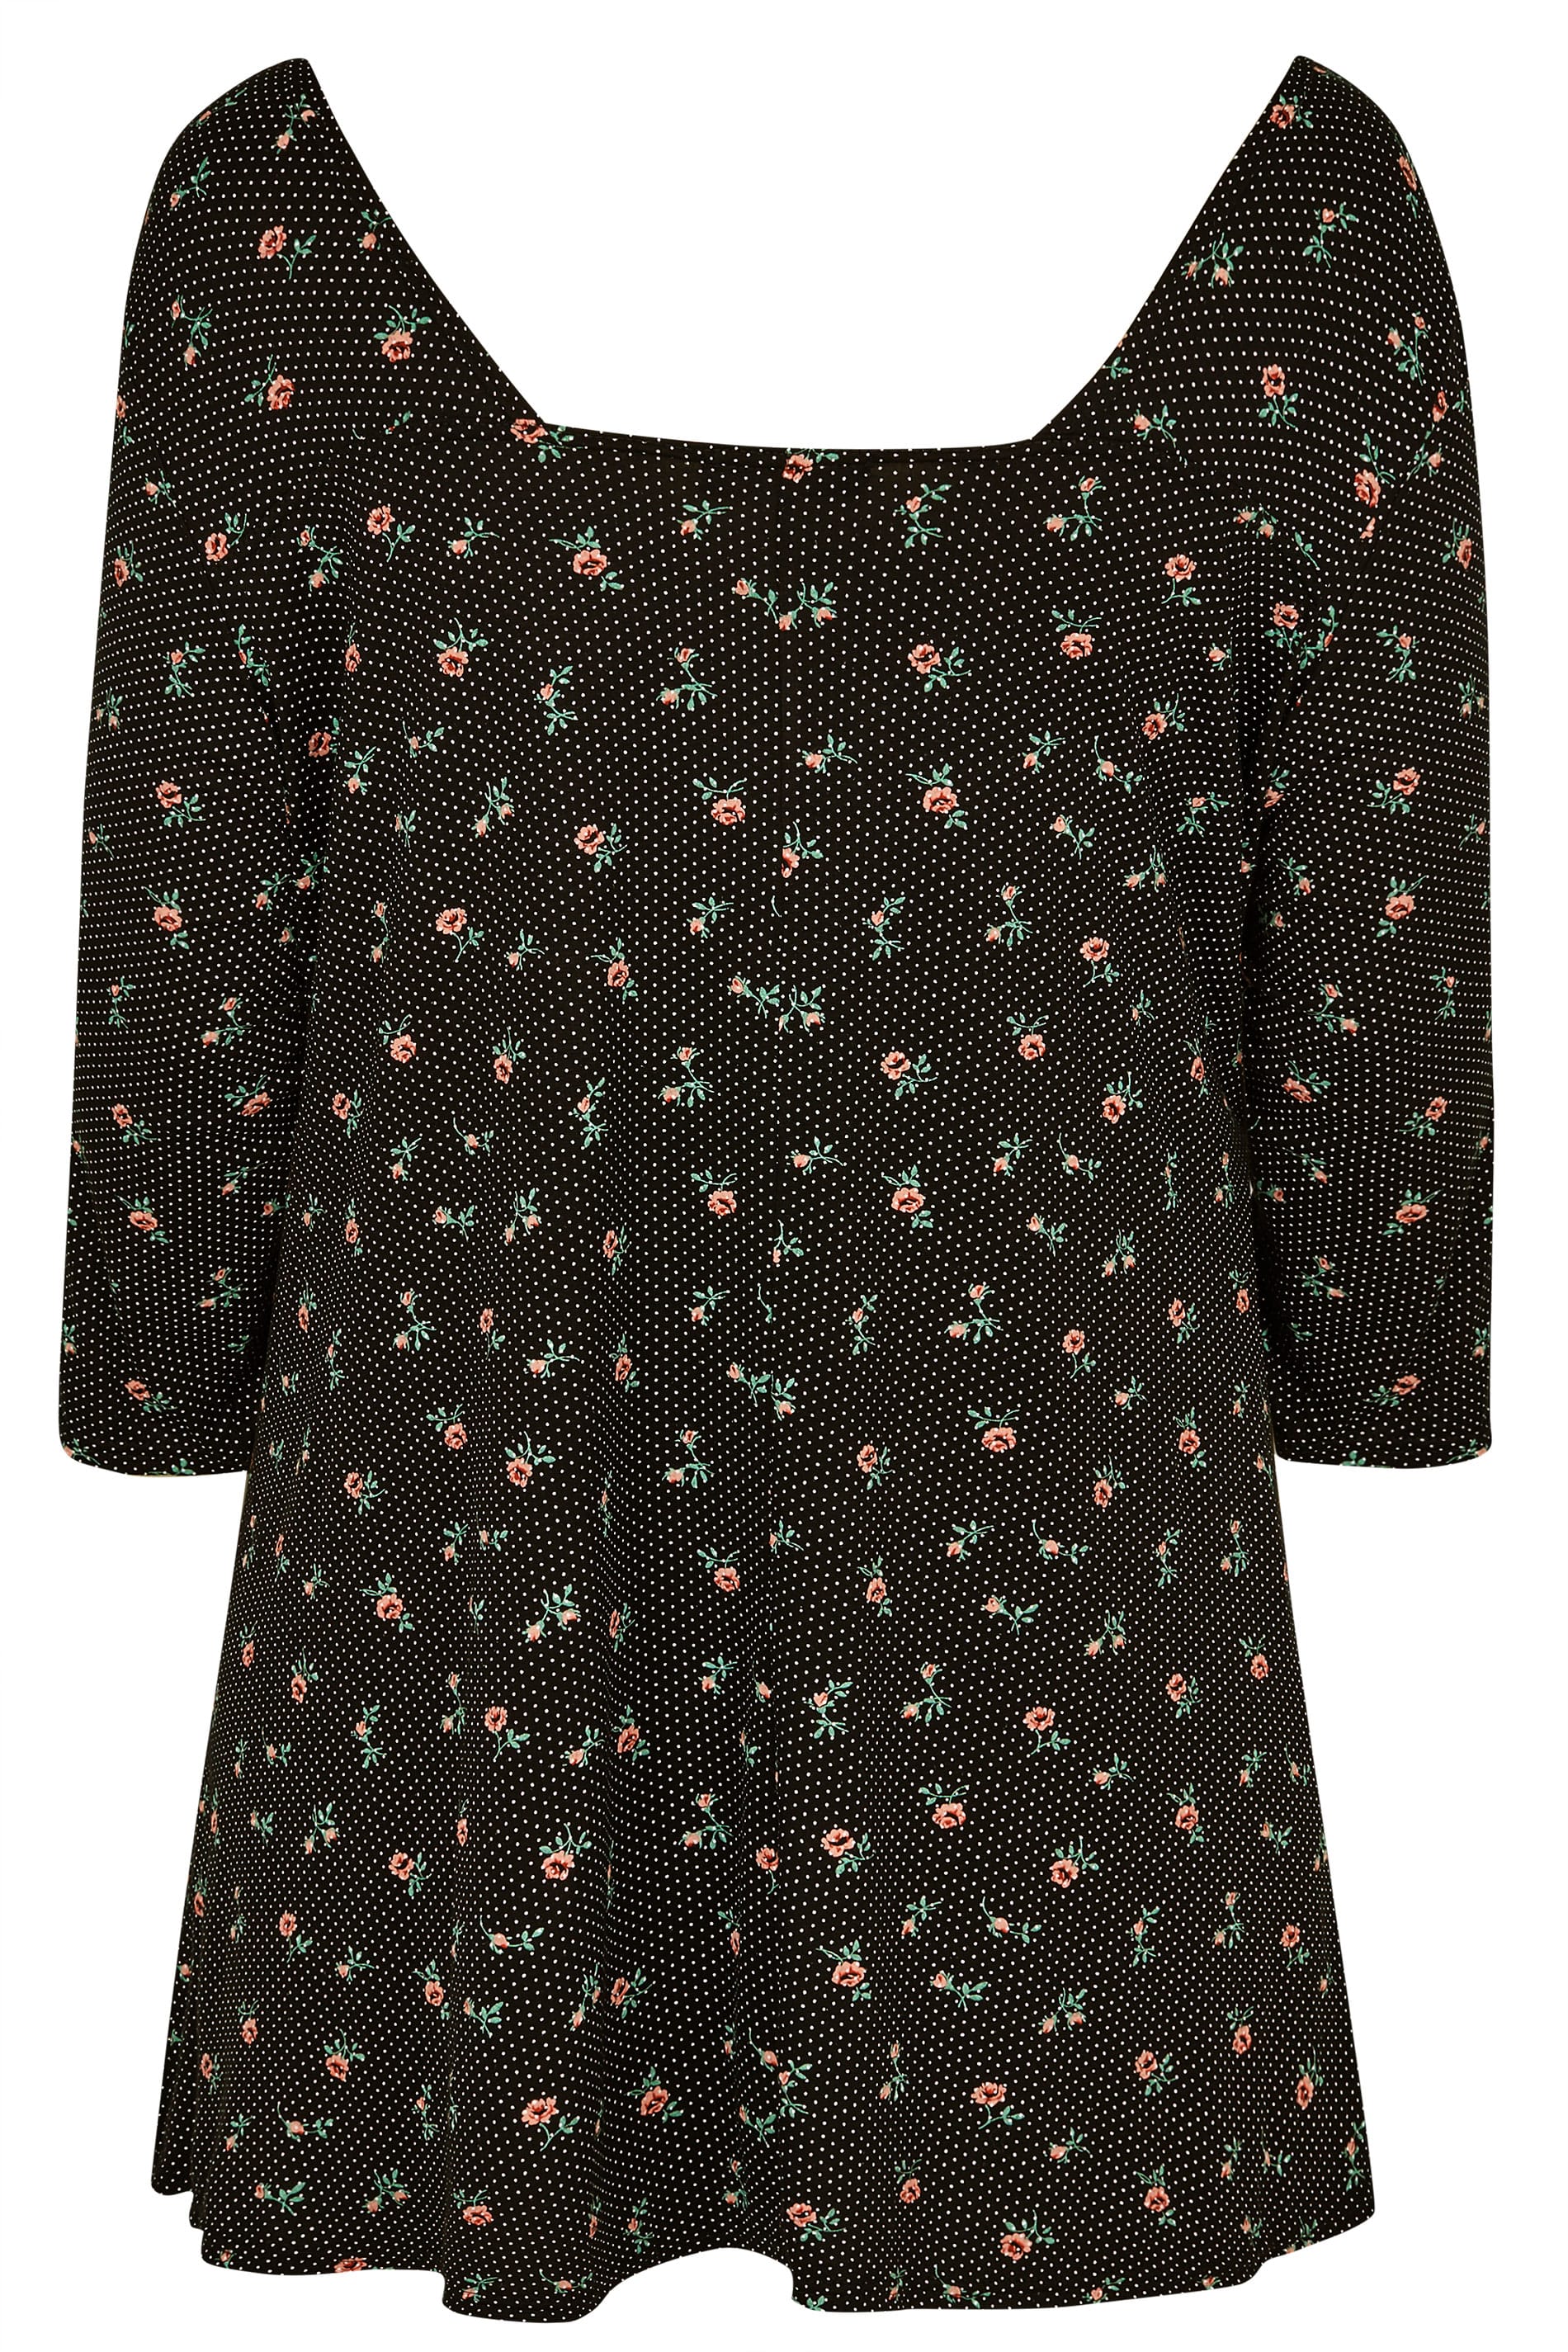 Plus Size Black Spot Ditsy Floral Swing Top | Sizes 16 to 36 | Yours ...